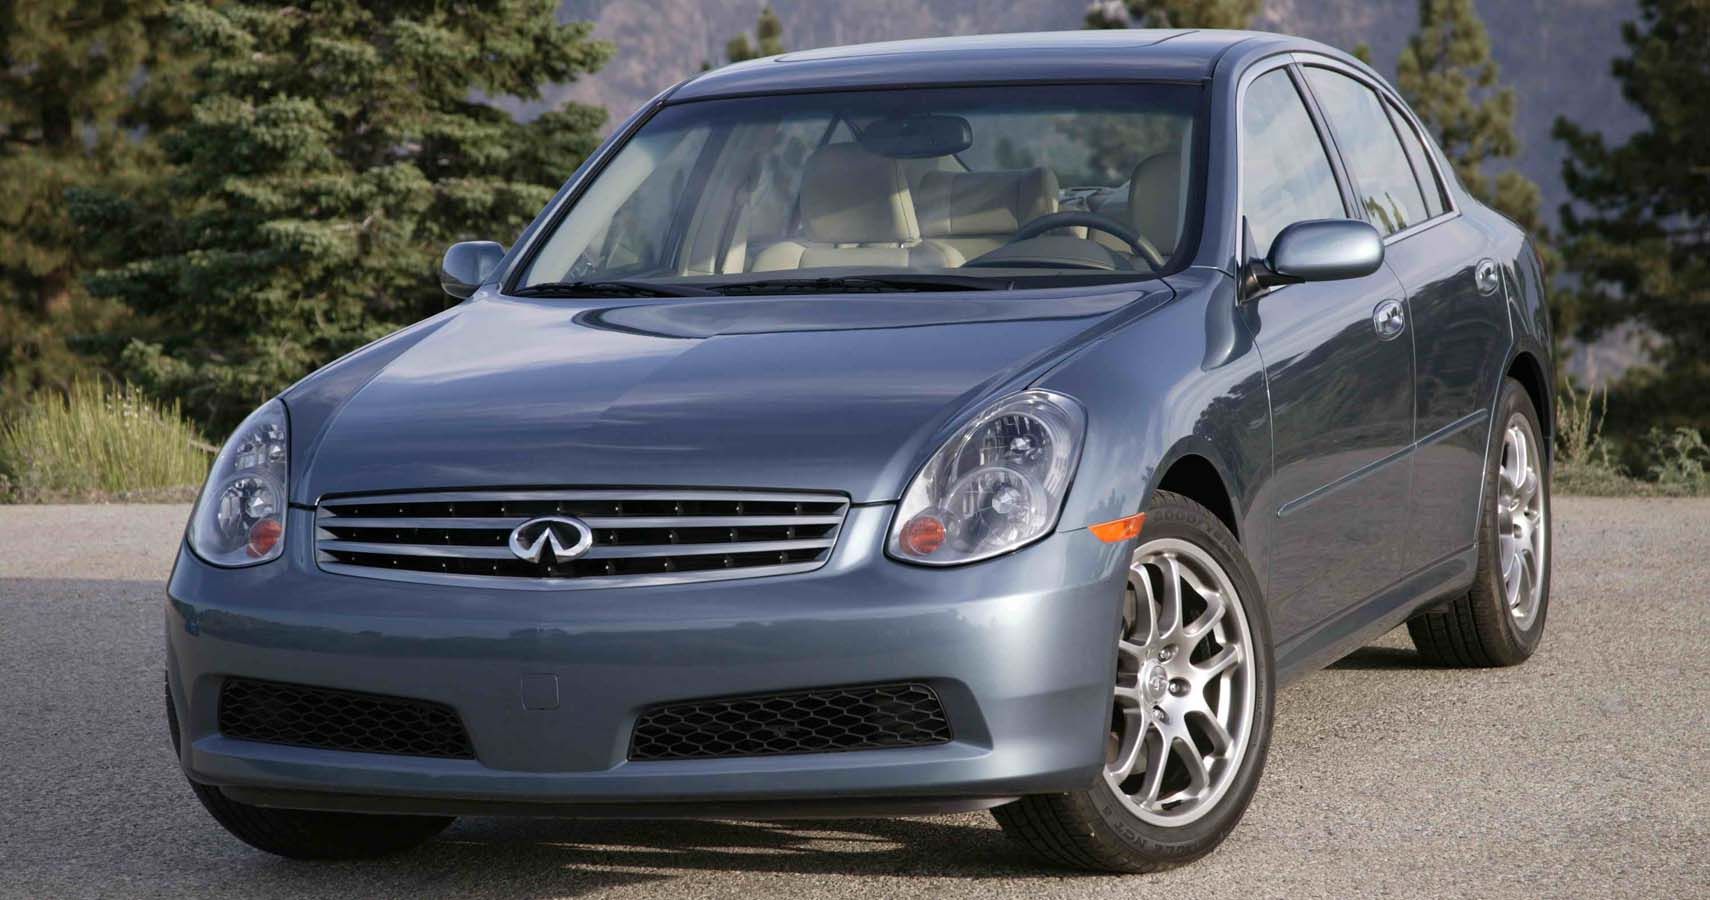 In 2009, According To An Interview In Super Street Online, Justin Lin Admitted That Earlier, He Had Finally Bought An Infiniti G35, A Dream Car For Him